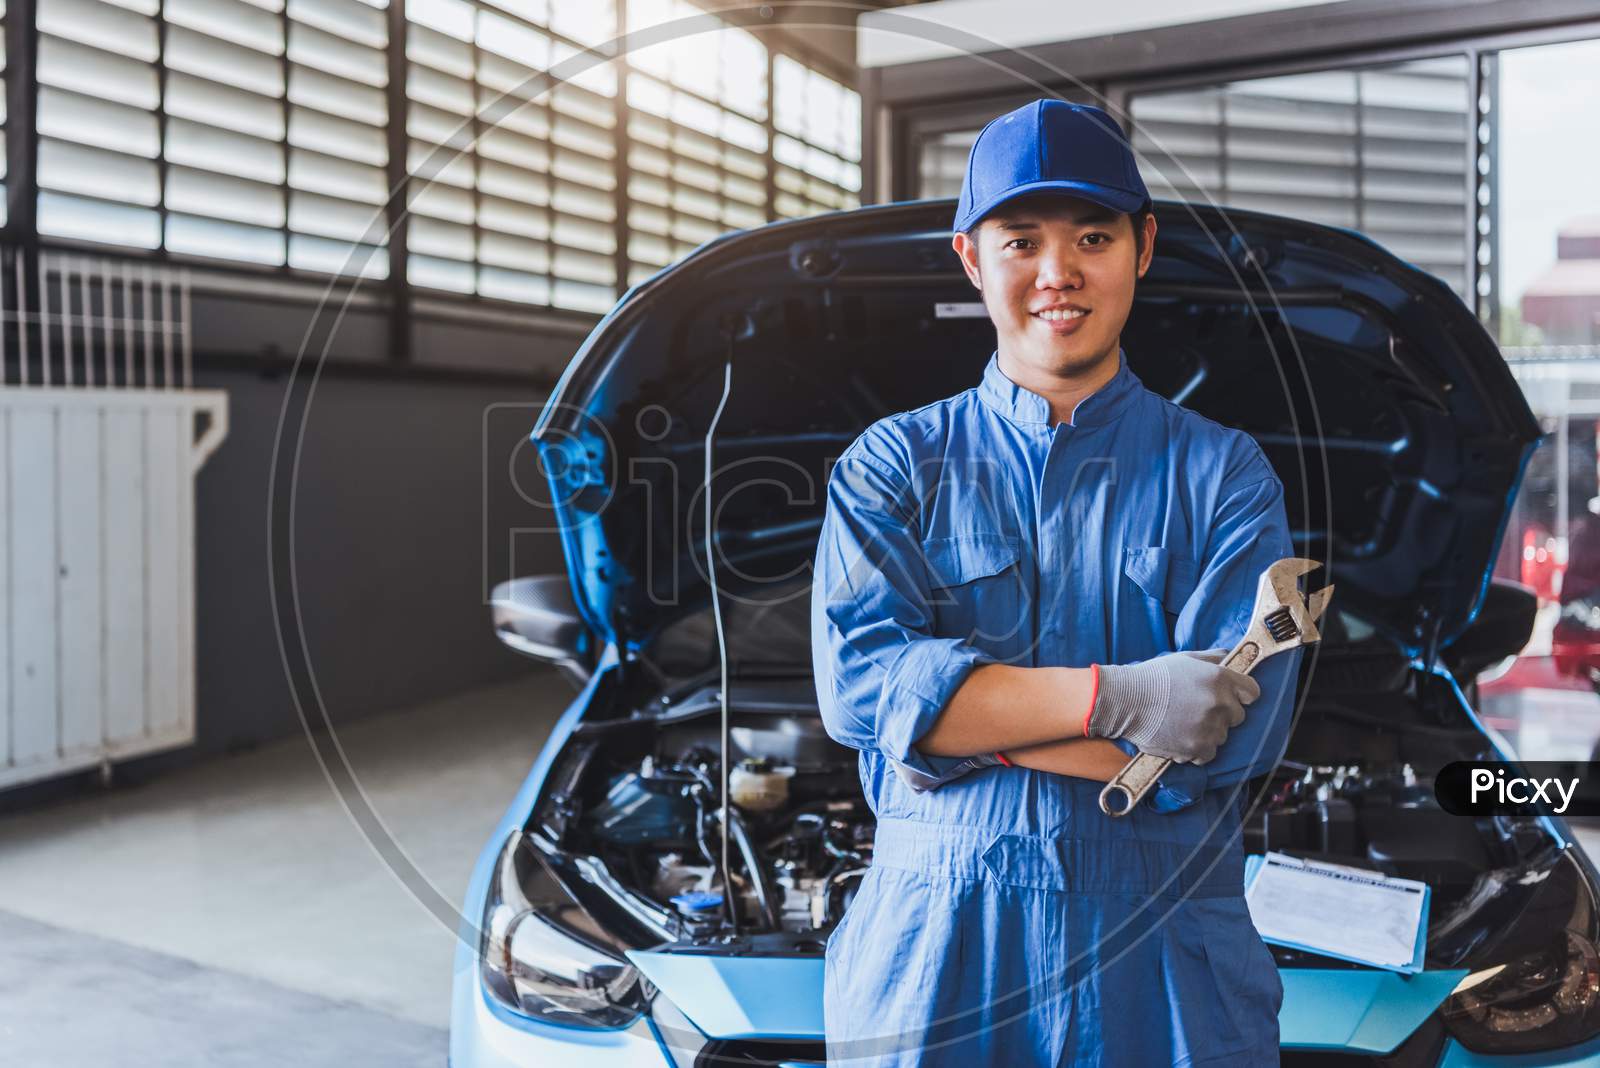 Happy Car Mechanic Inspection Technician Holding Wrench And Smiling To Camera After Fixing Customer Car Claim In Service Maintenance Insurance Of Car Engine. Transportation Automotive Industry Concept